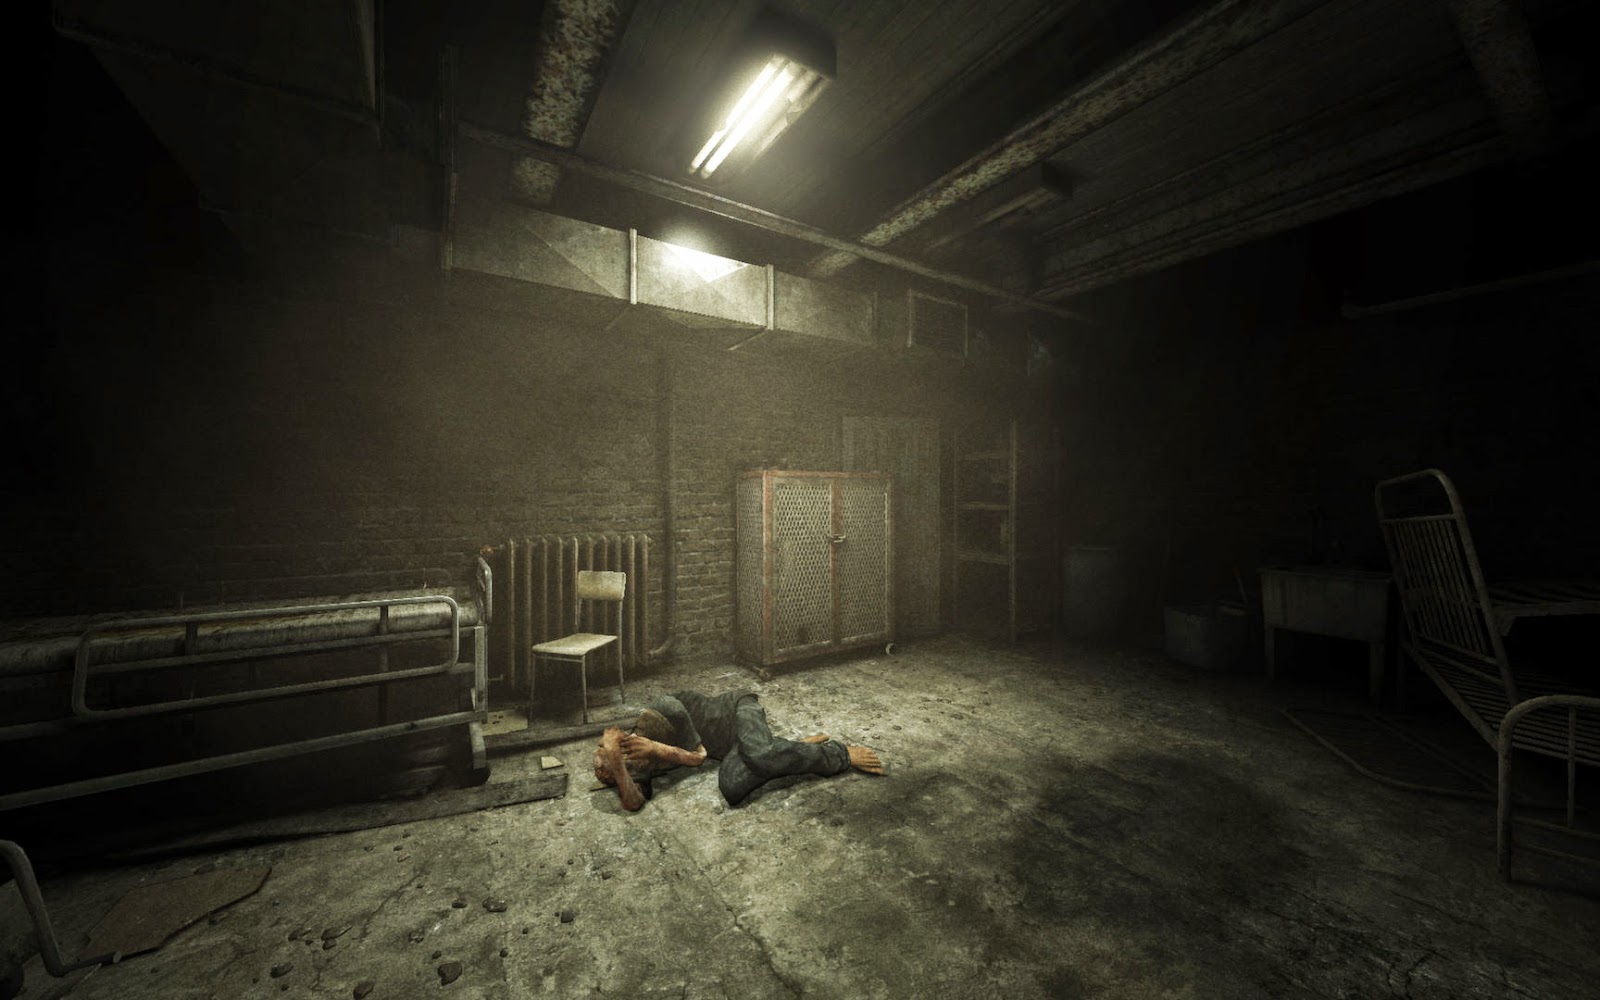 Outlast - Review